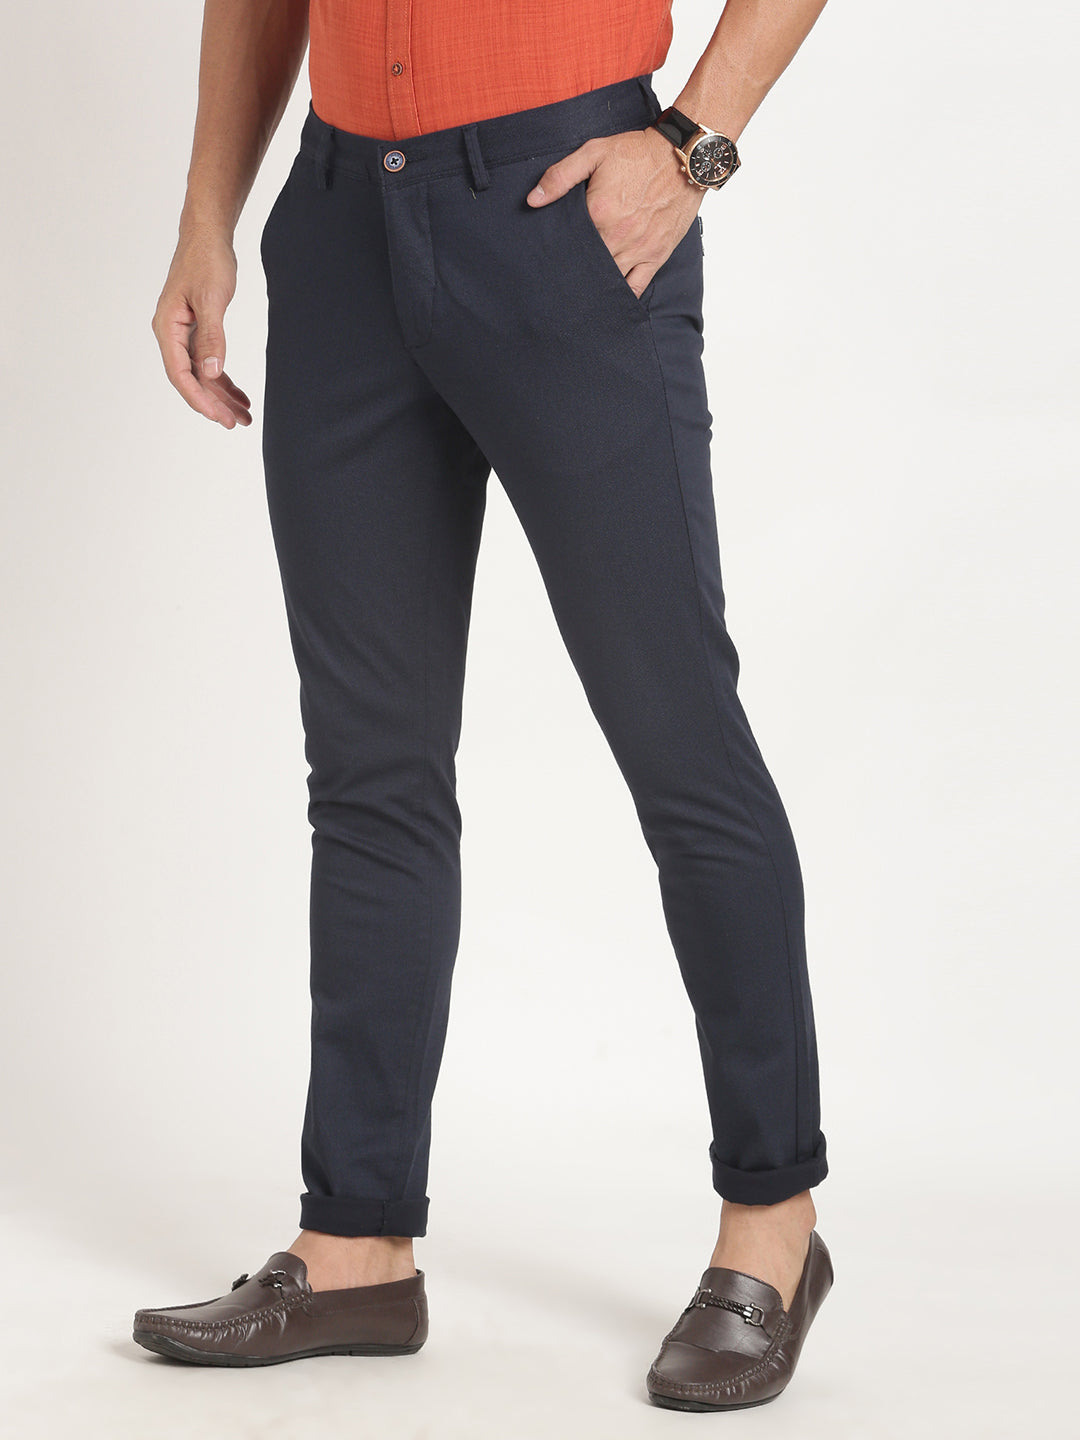 Cotton Stretch Navy Blue Checkered Narrow Fit Flat Front Casual Trouser